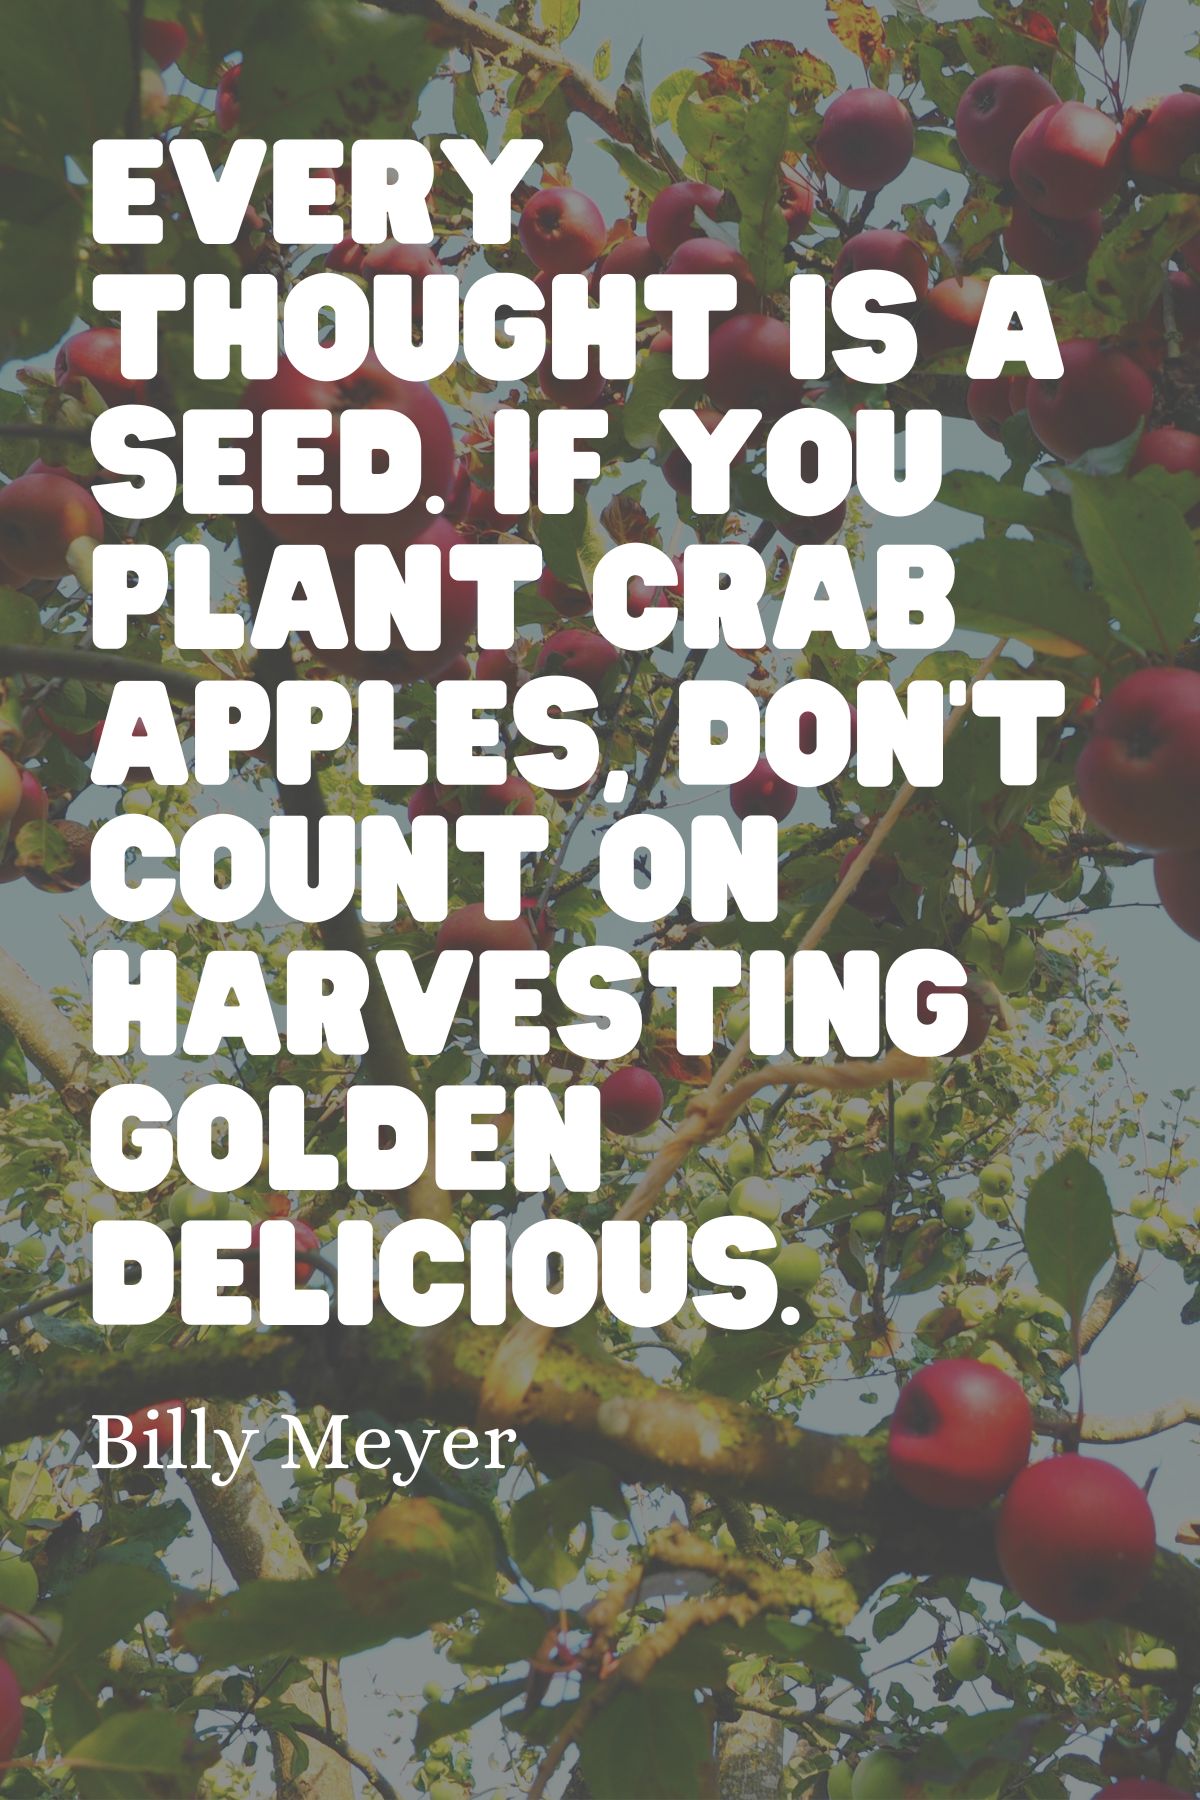 Quote saying "Every thought is a seed. If you plant crab apples, don't count on harvesting Golden Delicious."
